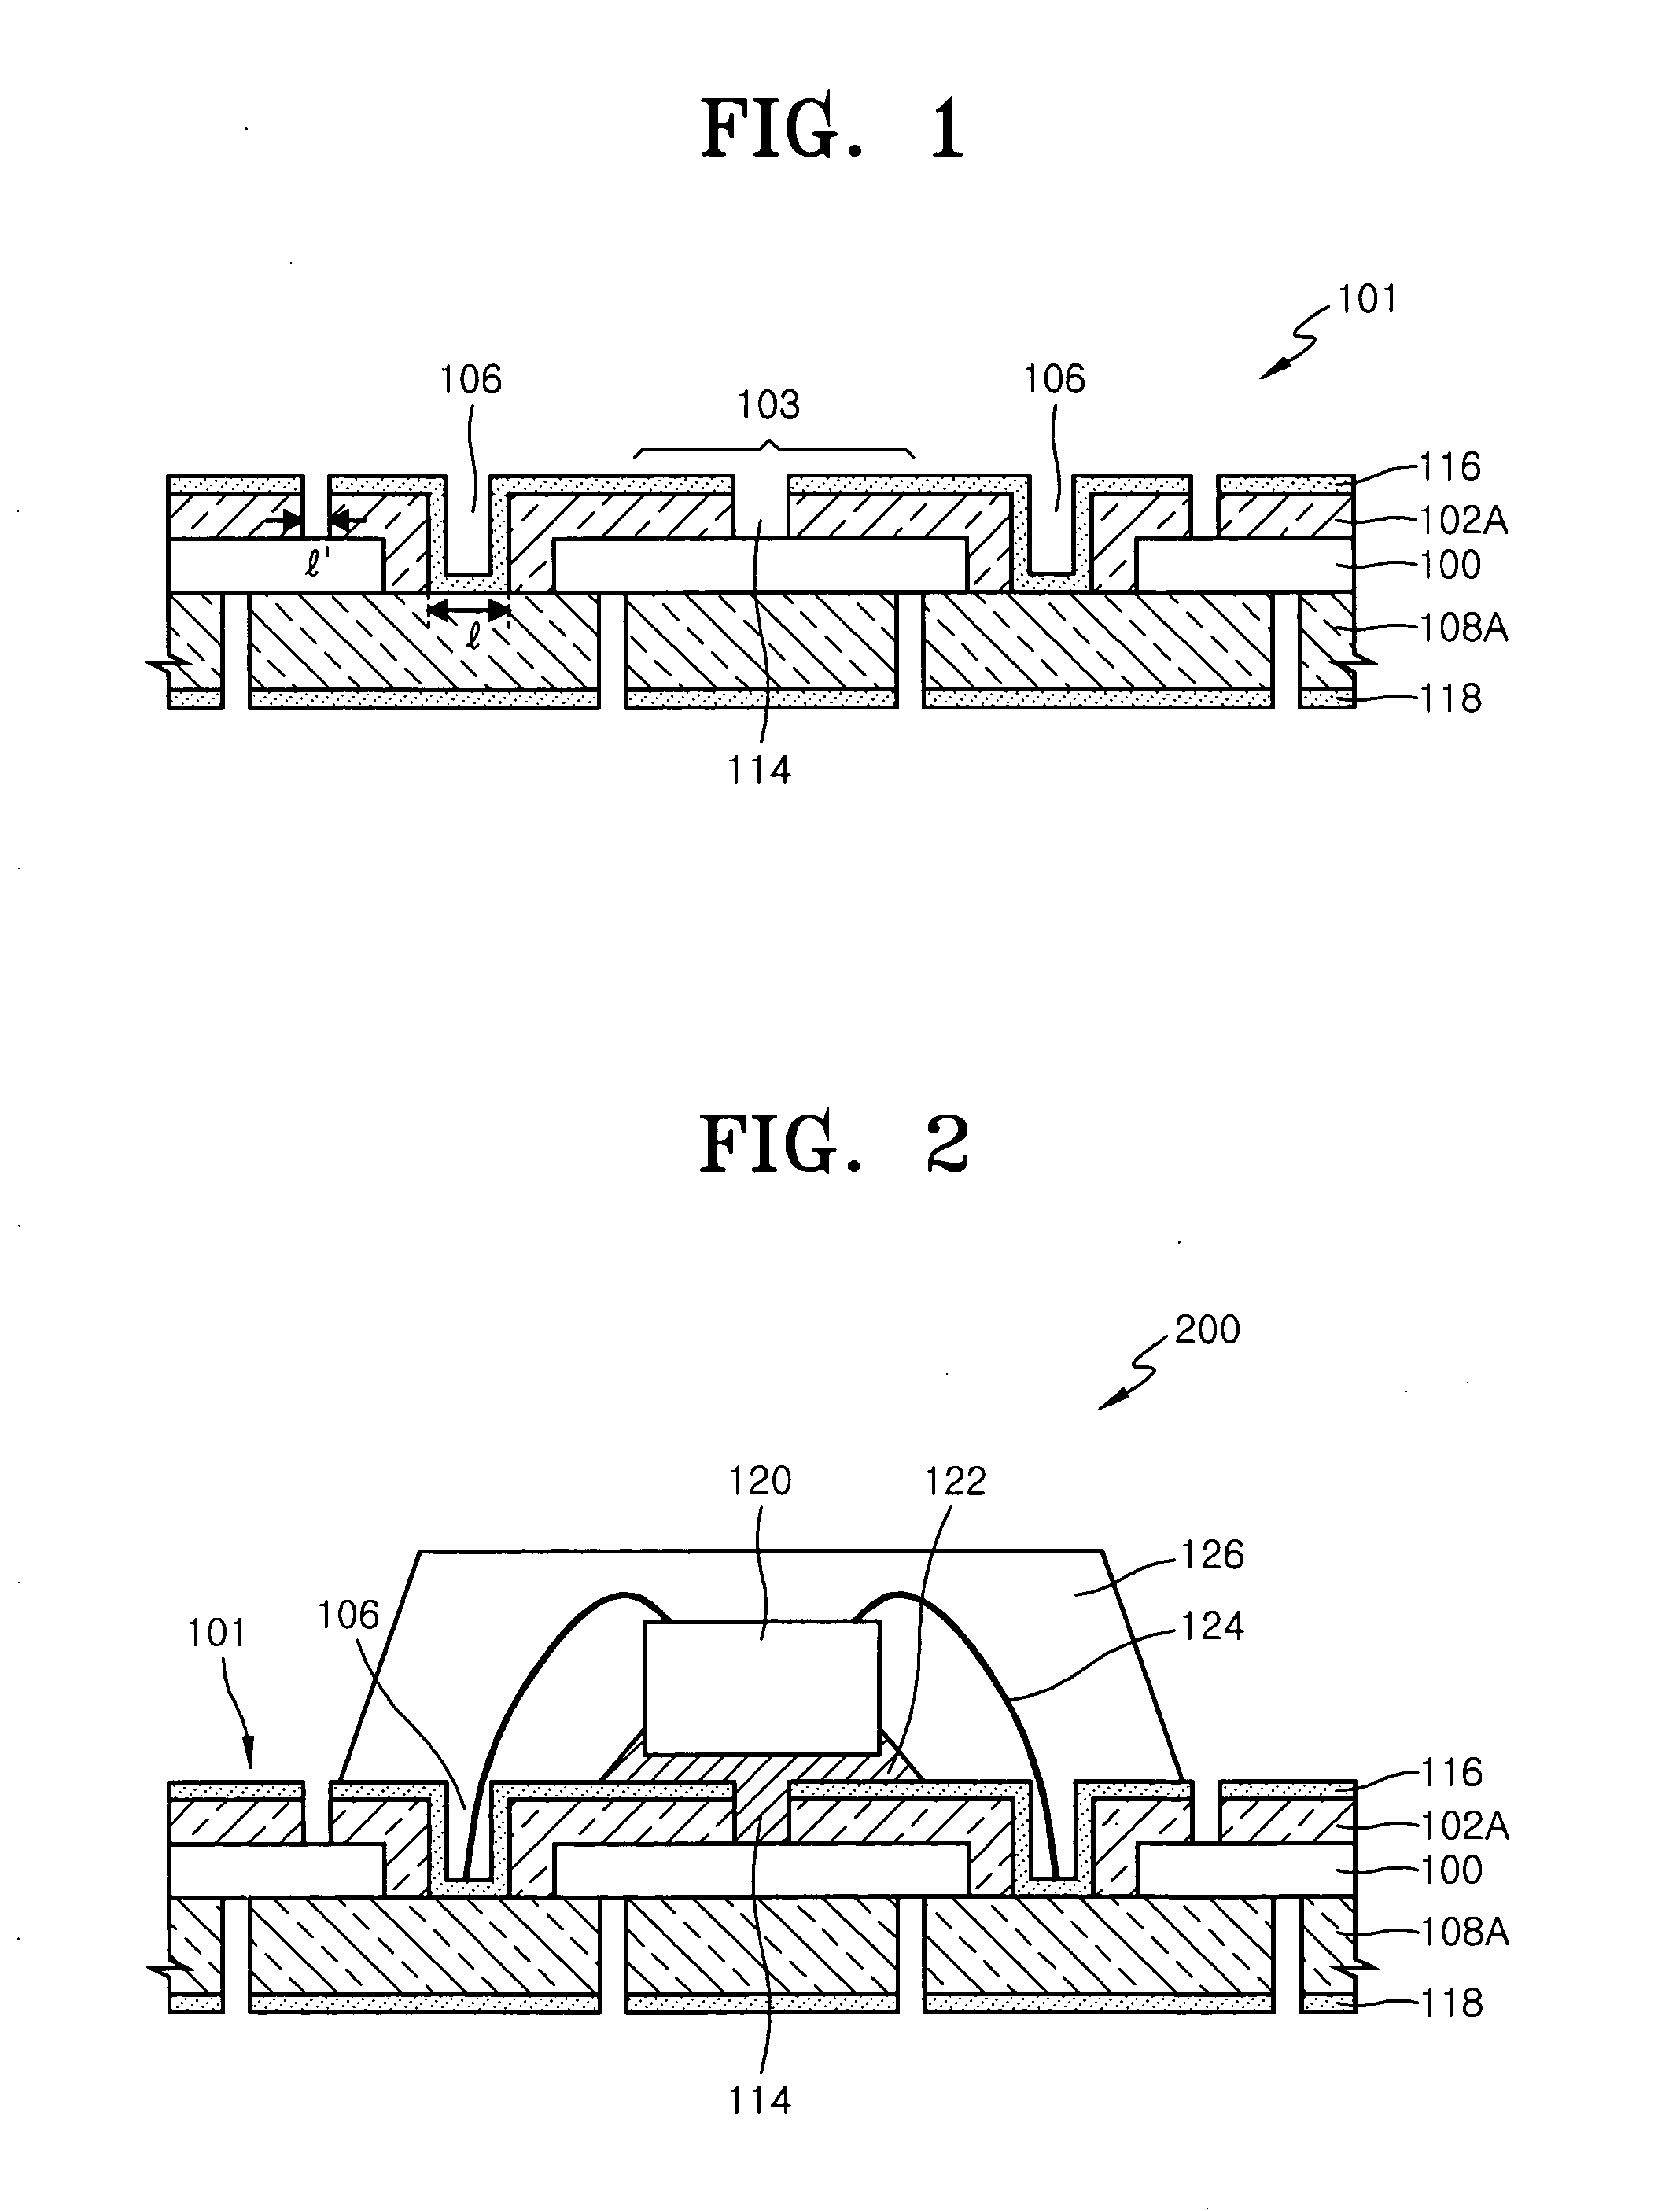 Substrate applicable to both wire bonding and flip chip bonding, smart card modules having the substrate and methods for fabricating the same